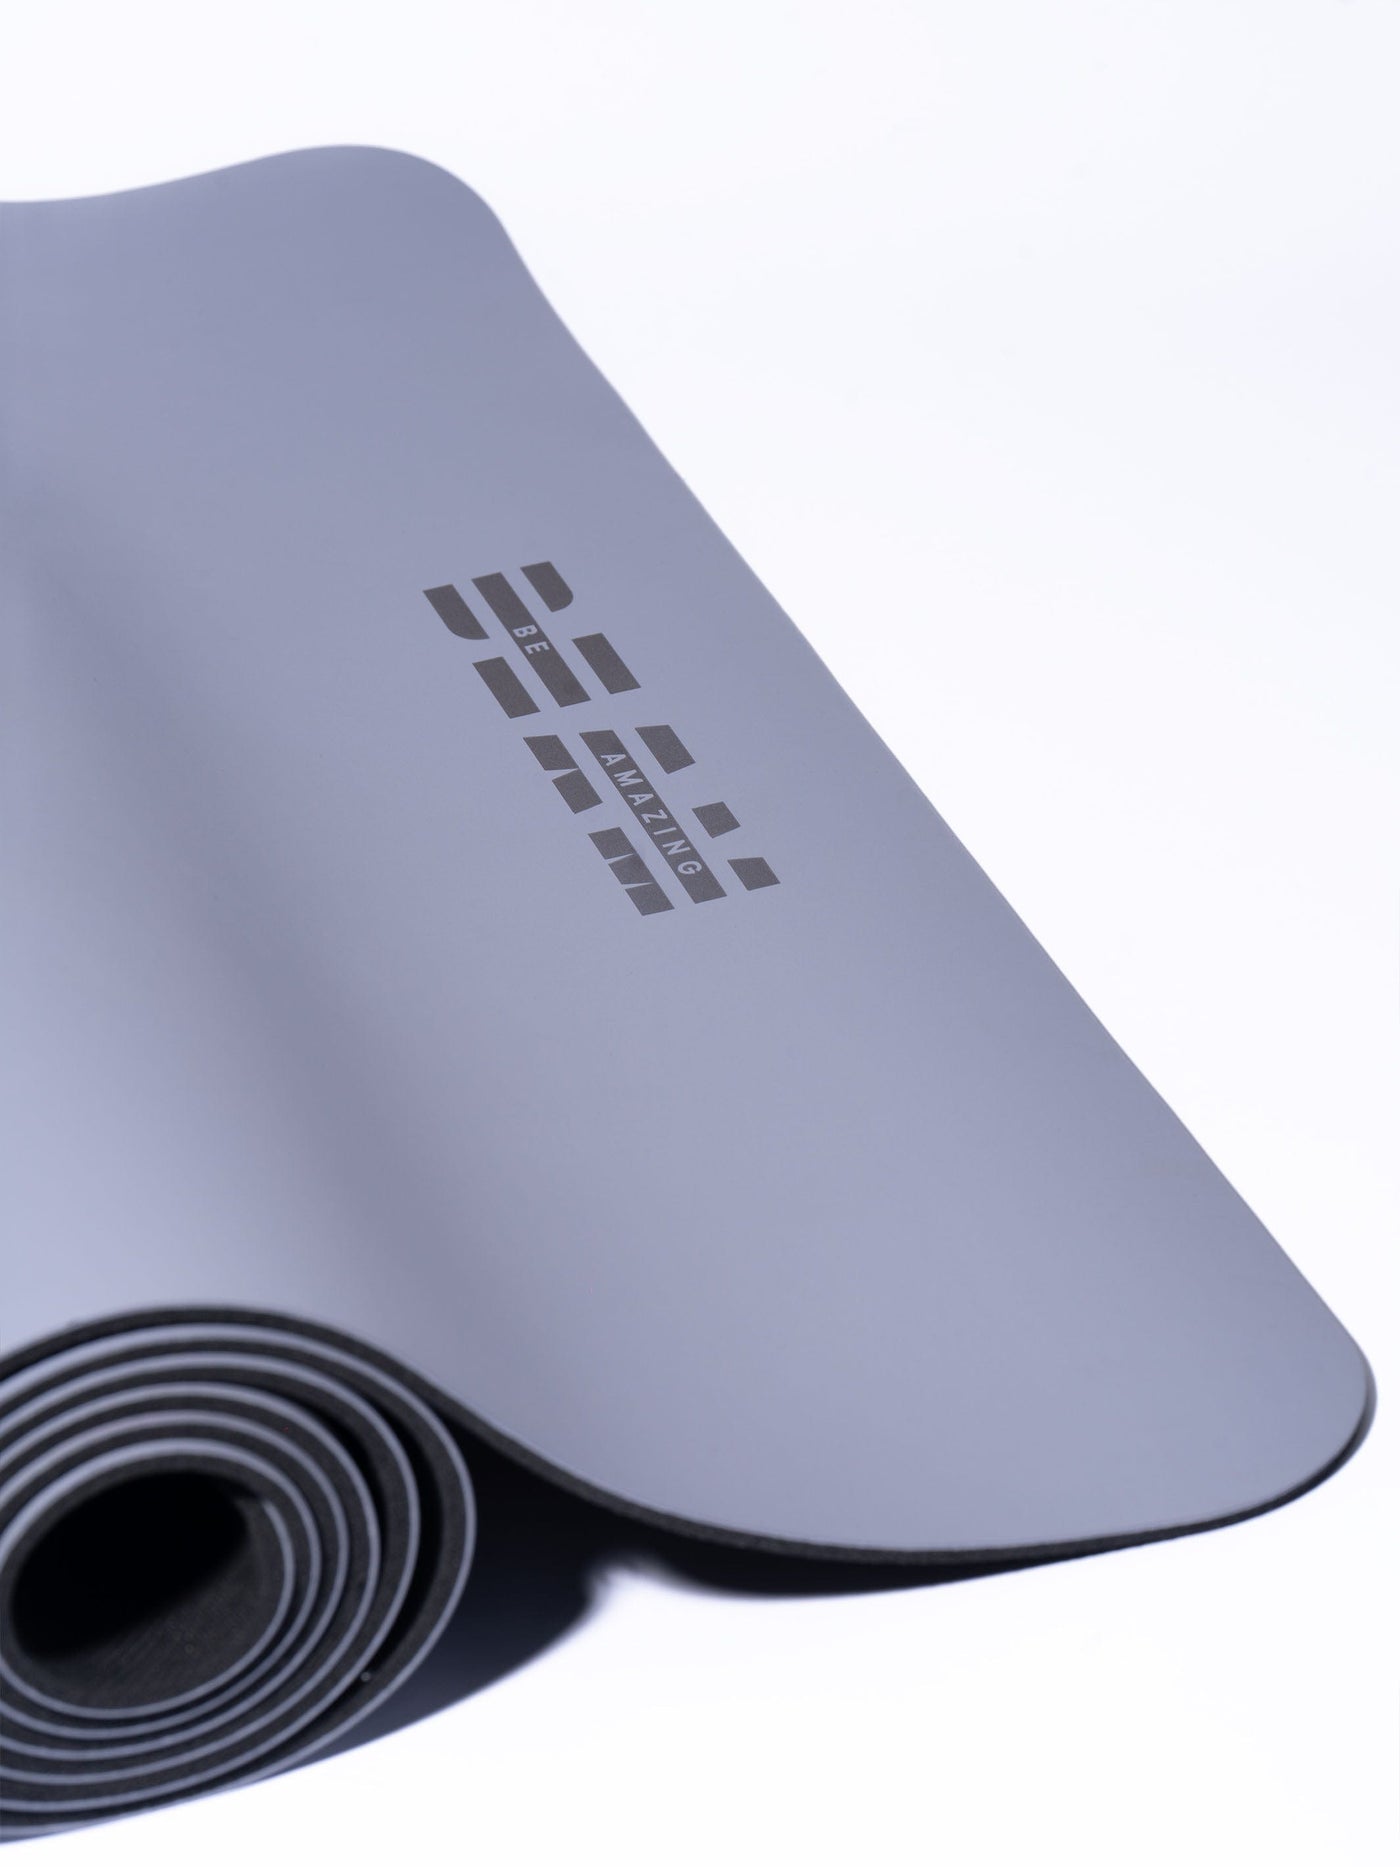 Best Deal in Canada  Trend Vision Extra Thick Yoga Mat 12Mm - Asst  NV-08077 CA - Canada's best deals on Electronics, TVs, Unlocked Cell  Phones, Macbooks, Laptops, Kitchen Appliances, Toys, Bed